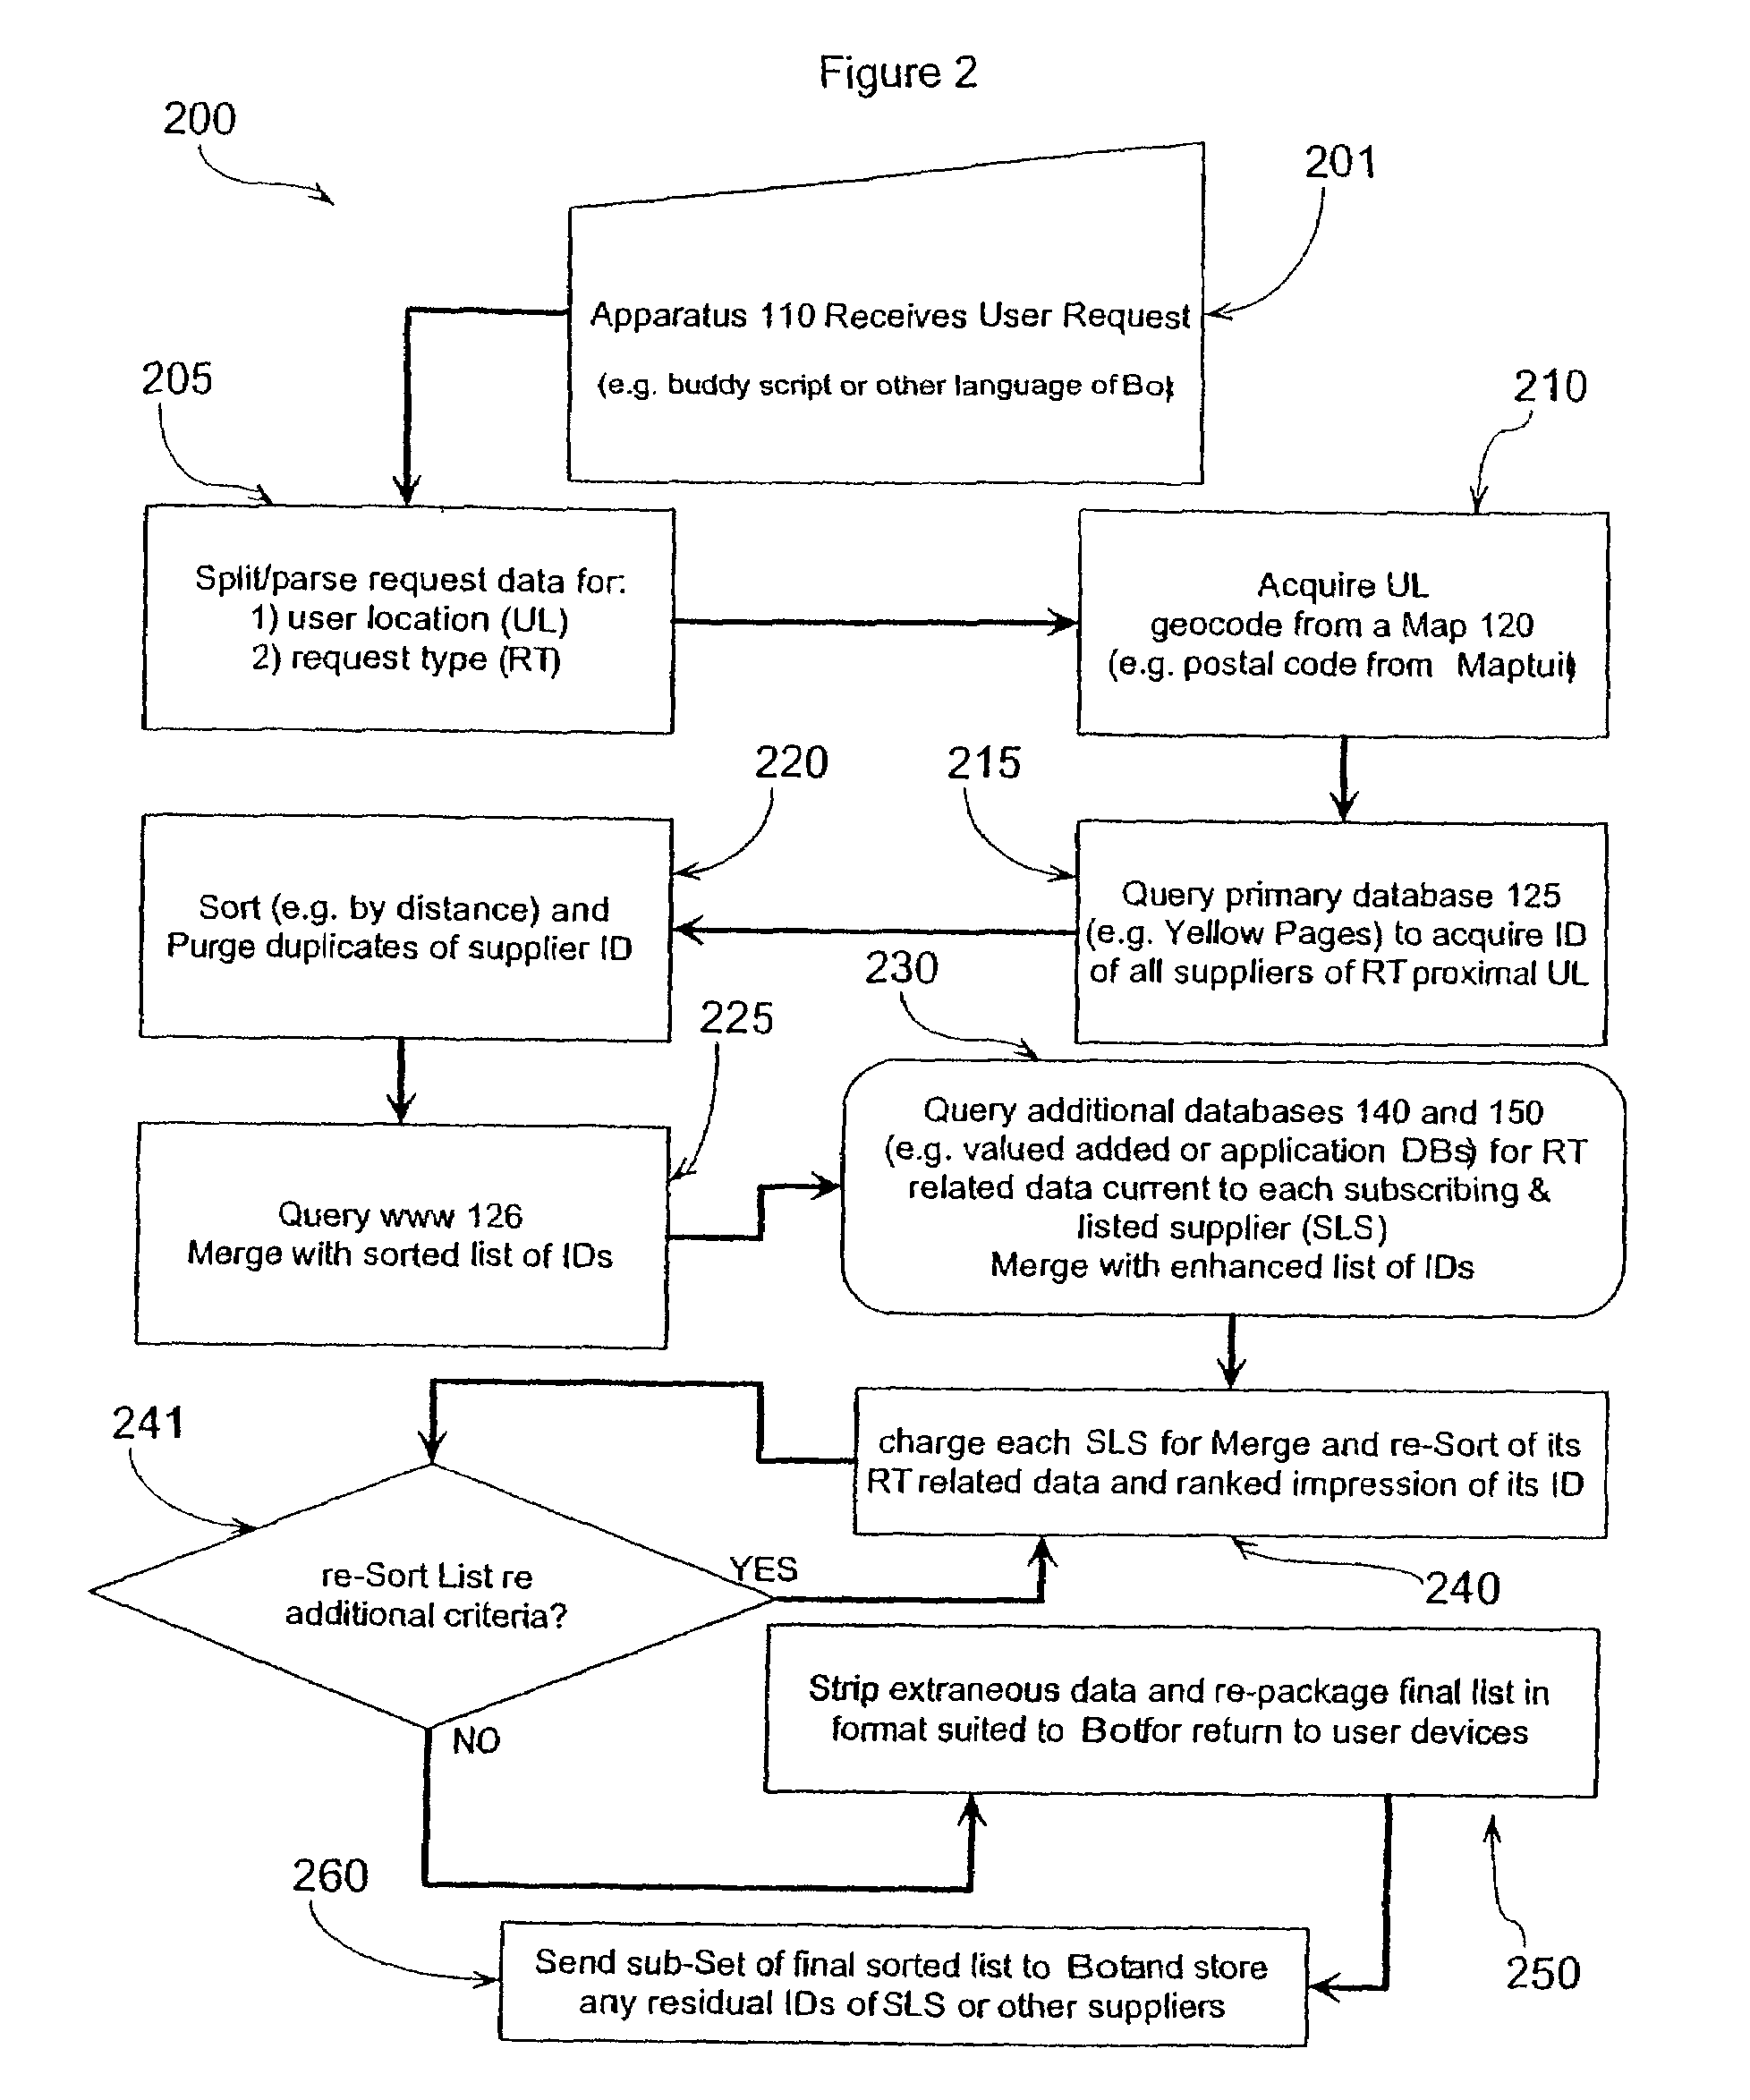 Multi-mode location based e-directory service enabling method, system, and apparatus